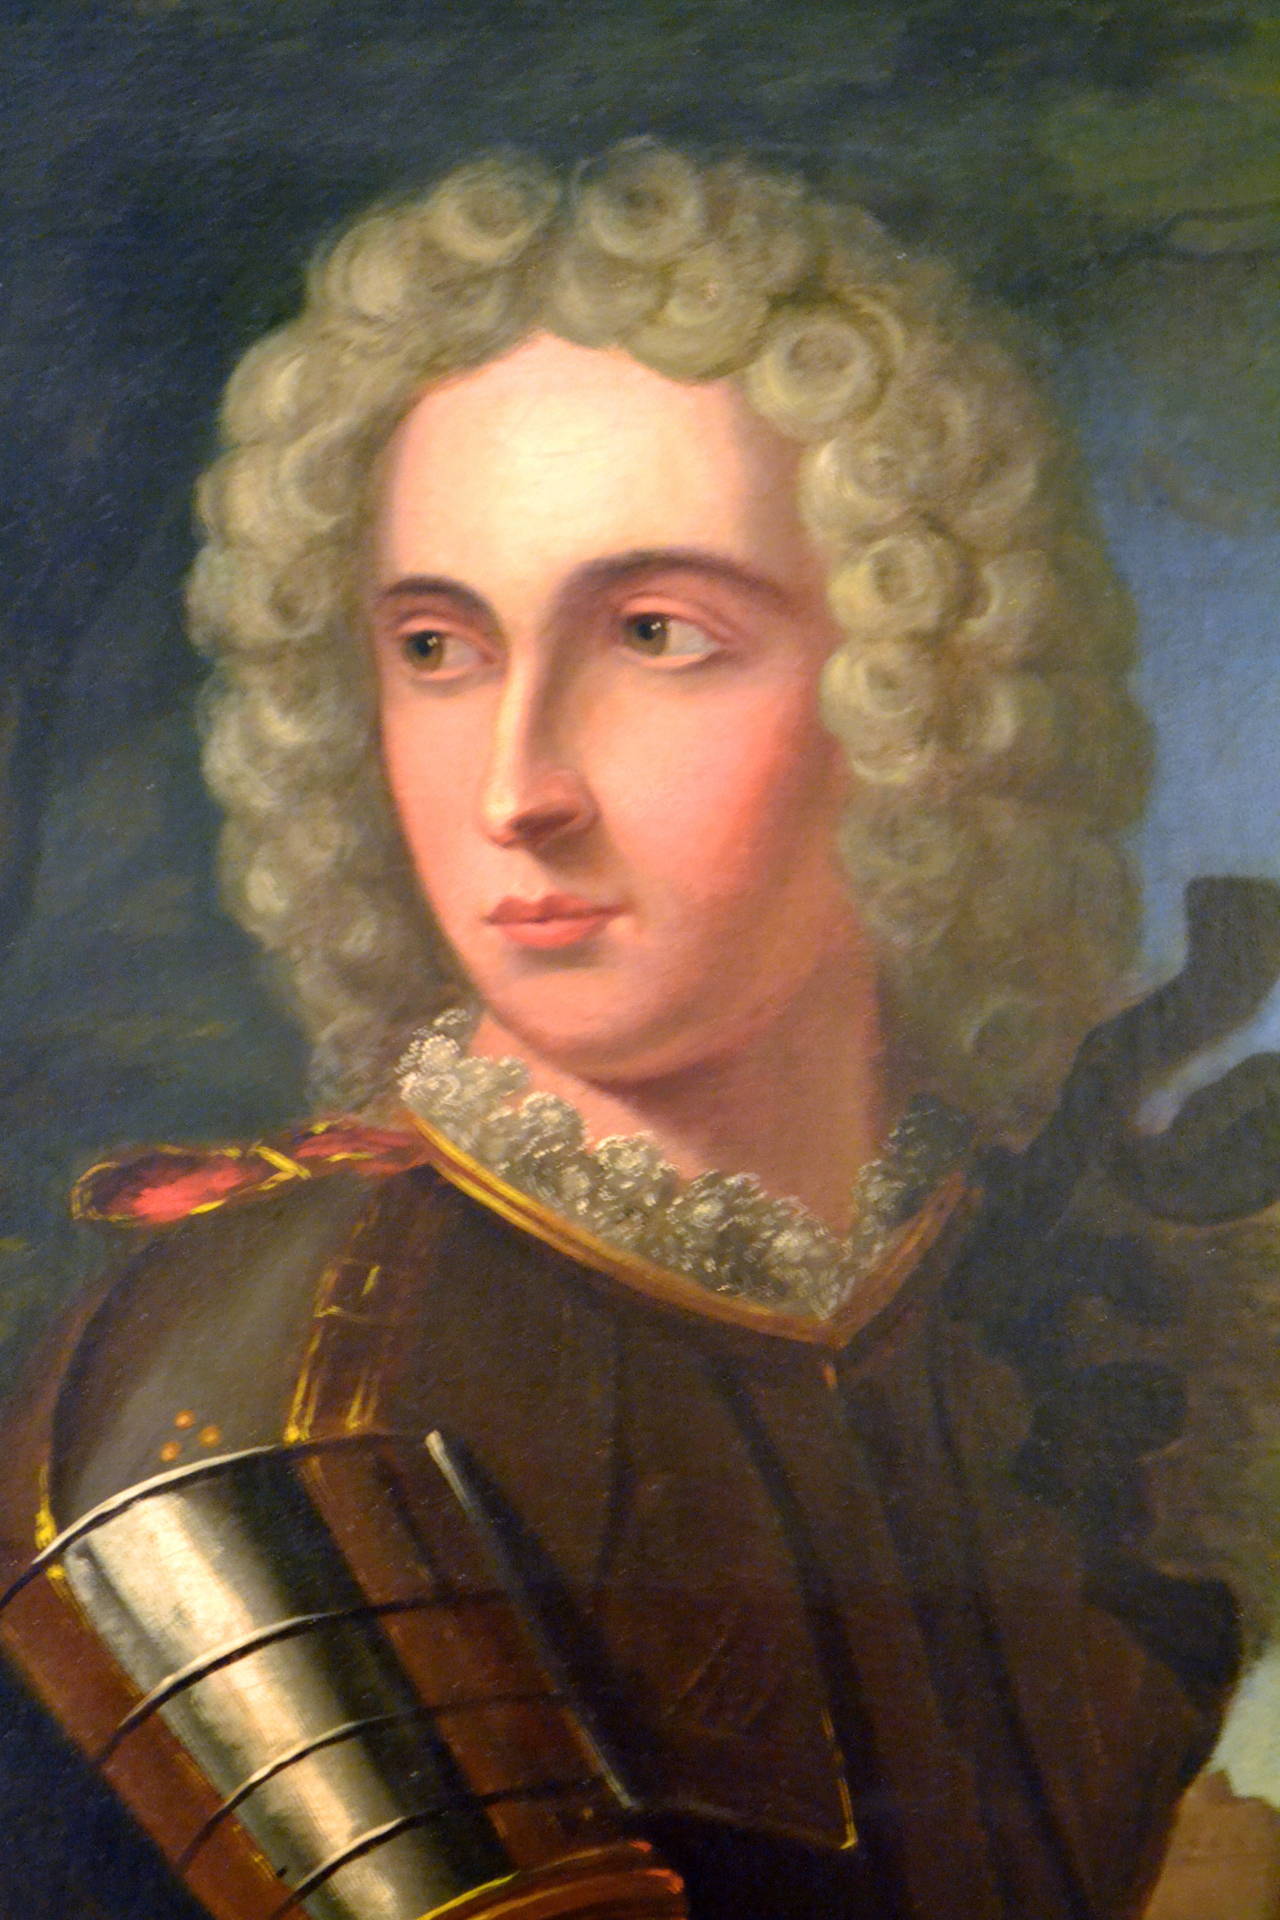 Portrait of a Gentleman Wearing Armor - Painting by Unknown